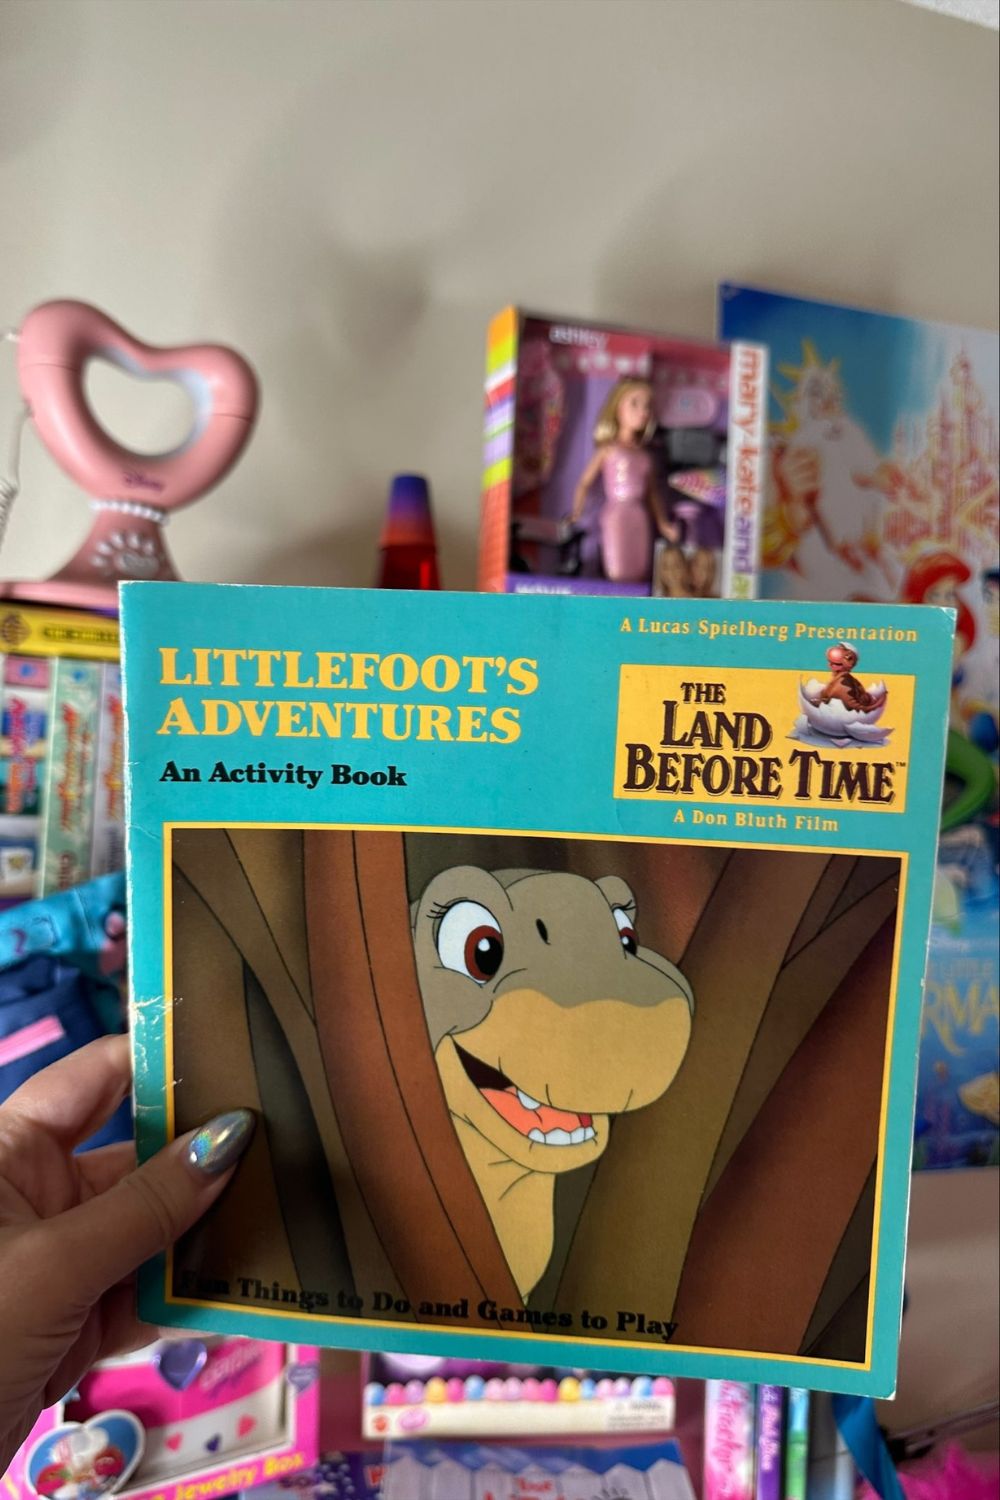 THE LAND BEFORE TIME: LITTLE FOOT'S ADVENTURES*